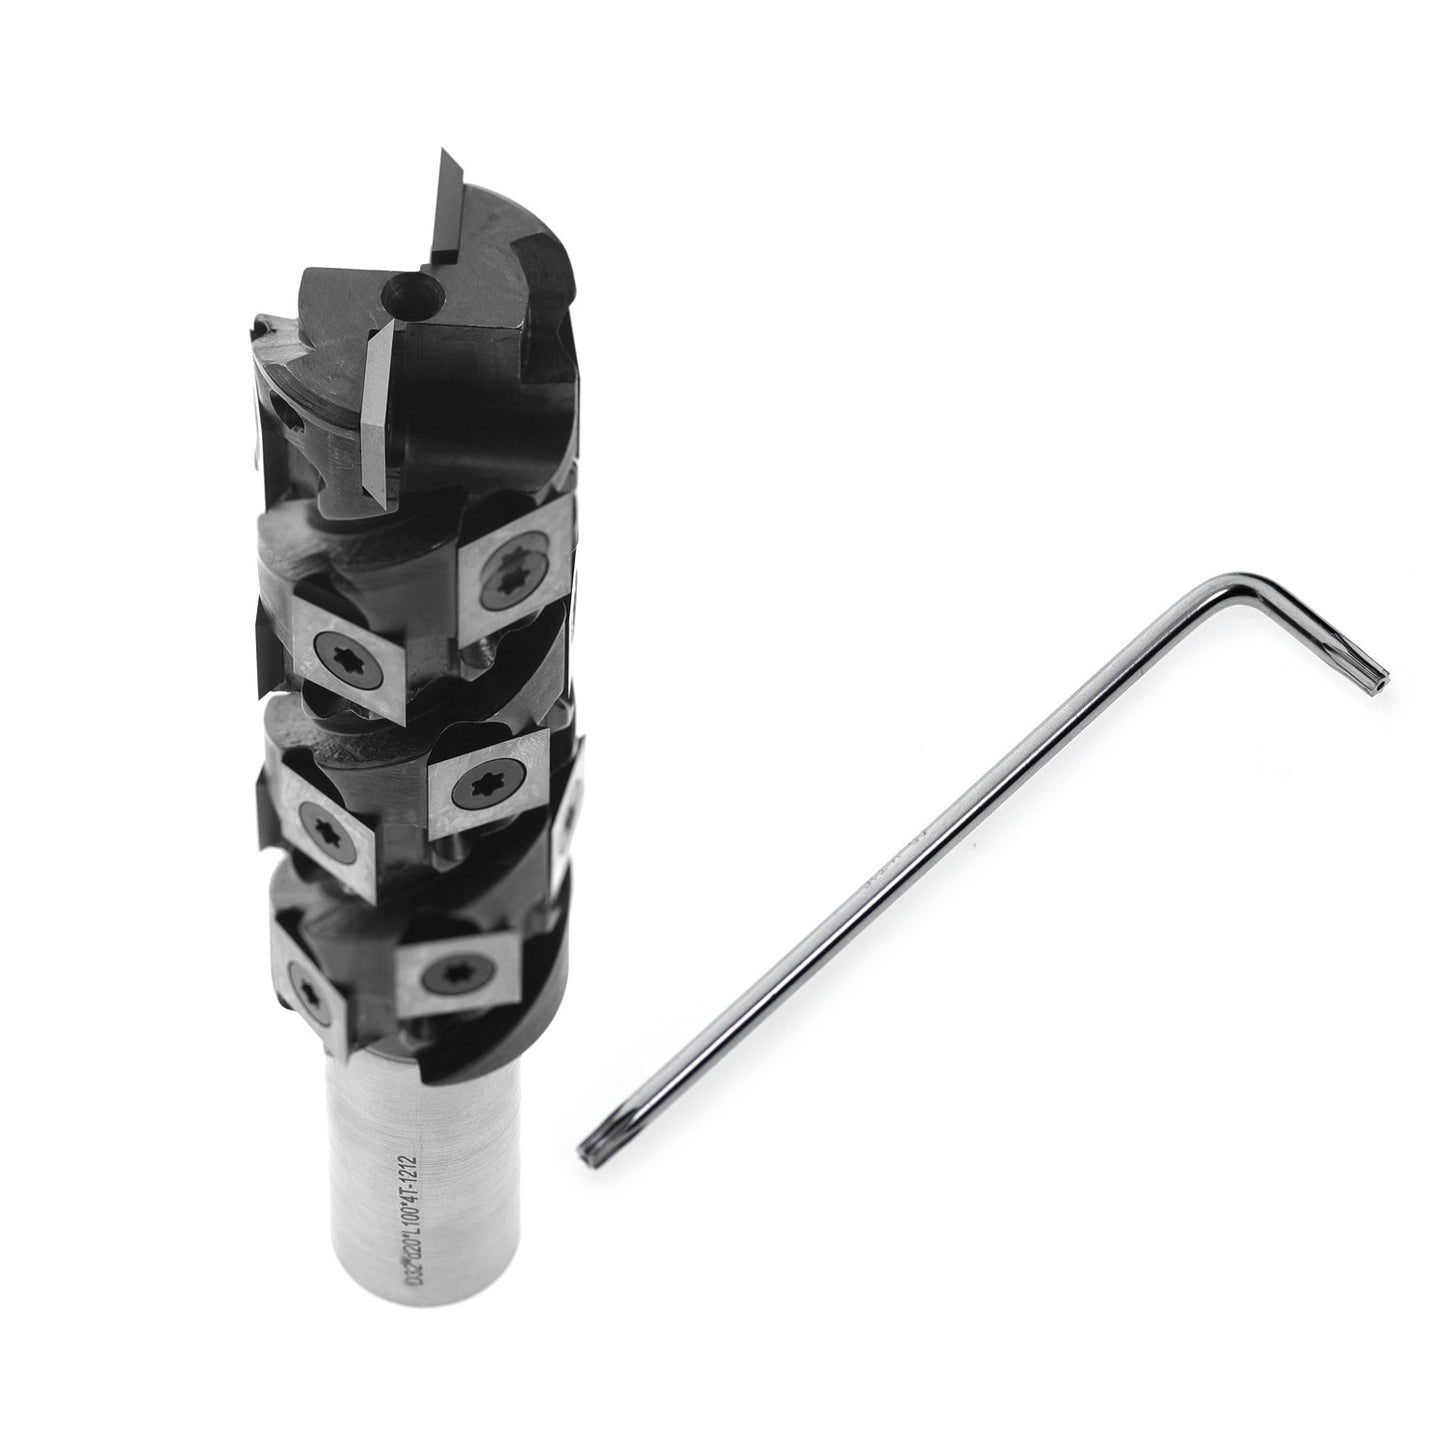 Insert Carbide Spiral Flush Trim Router Bit for Wood Trimming Bottom Cleaning 20 mm Shank X 100 mm Cutting Length